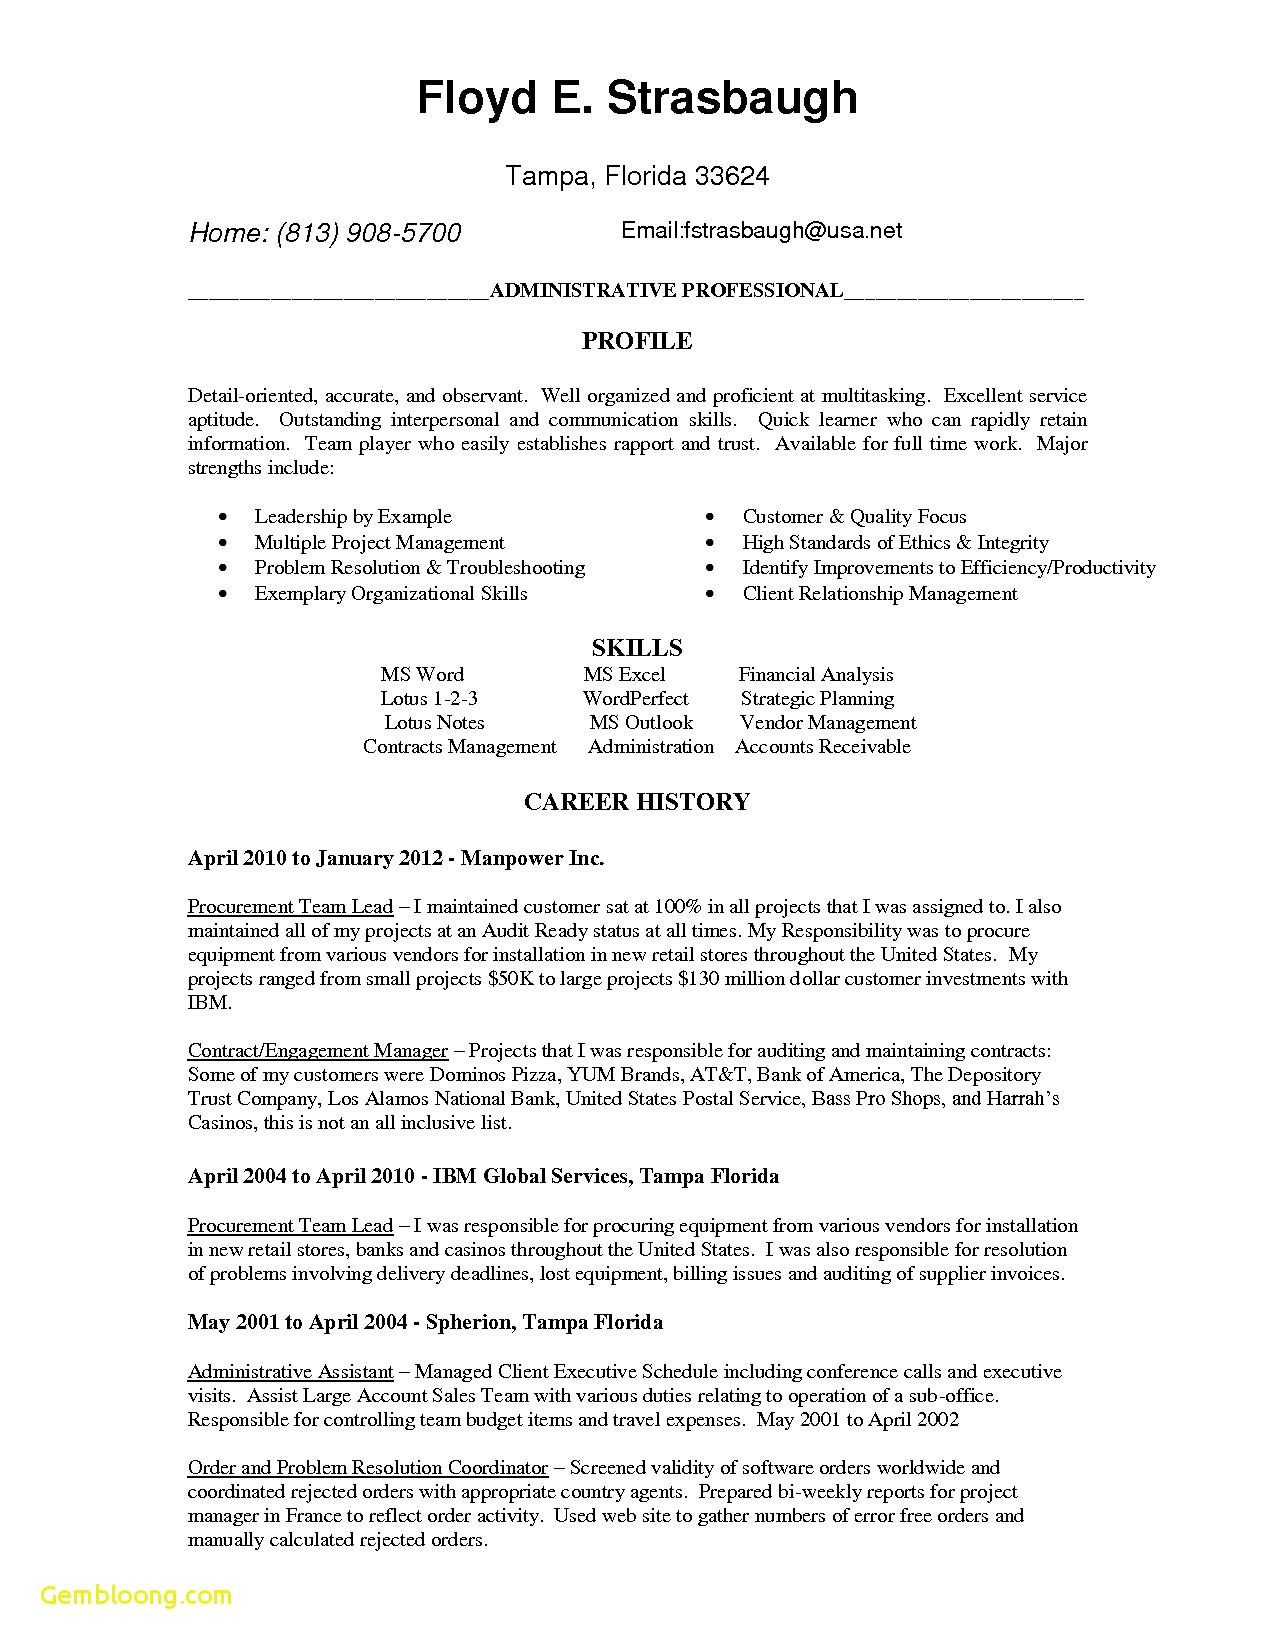 word document cover letter template example-Resume Template Word Doc Download now Executive Resume Templates Word Od Specialist Cover Letter Lead 20-o